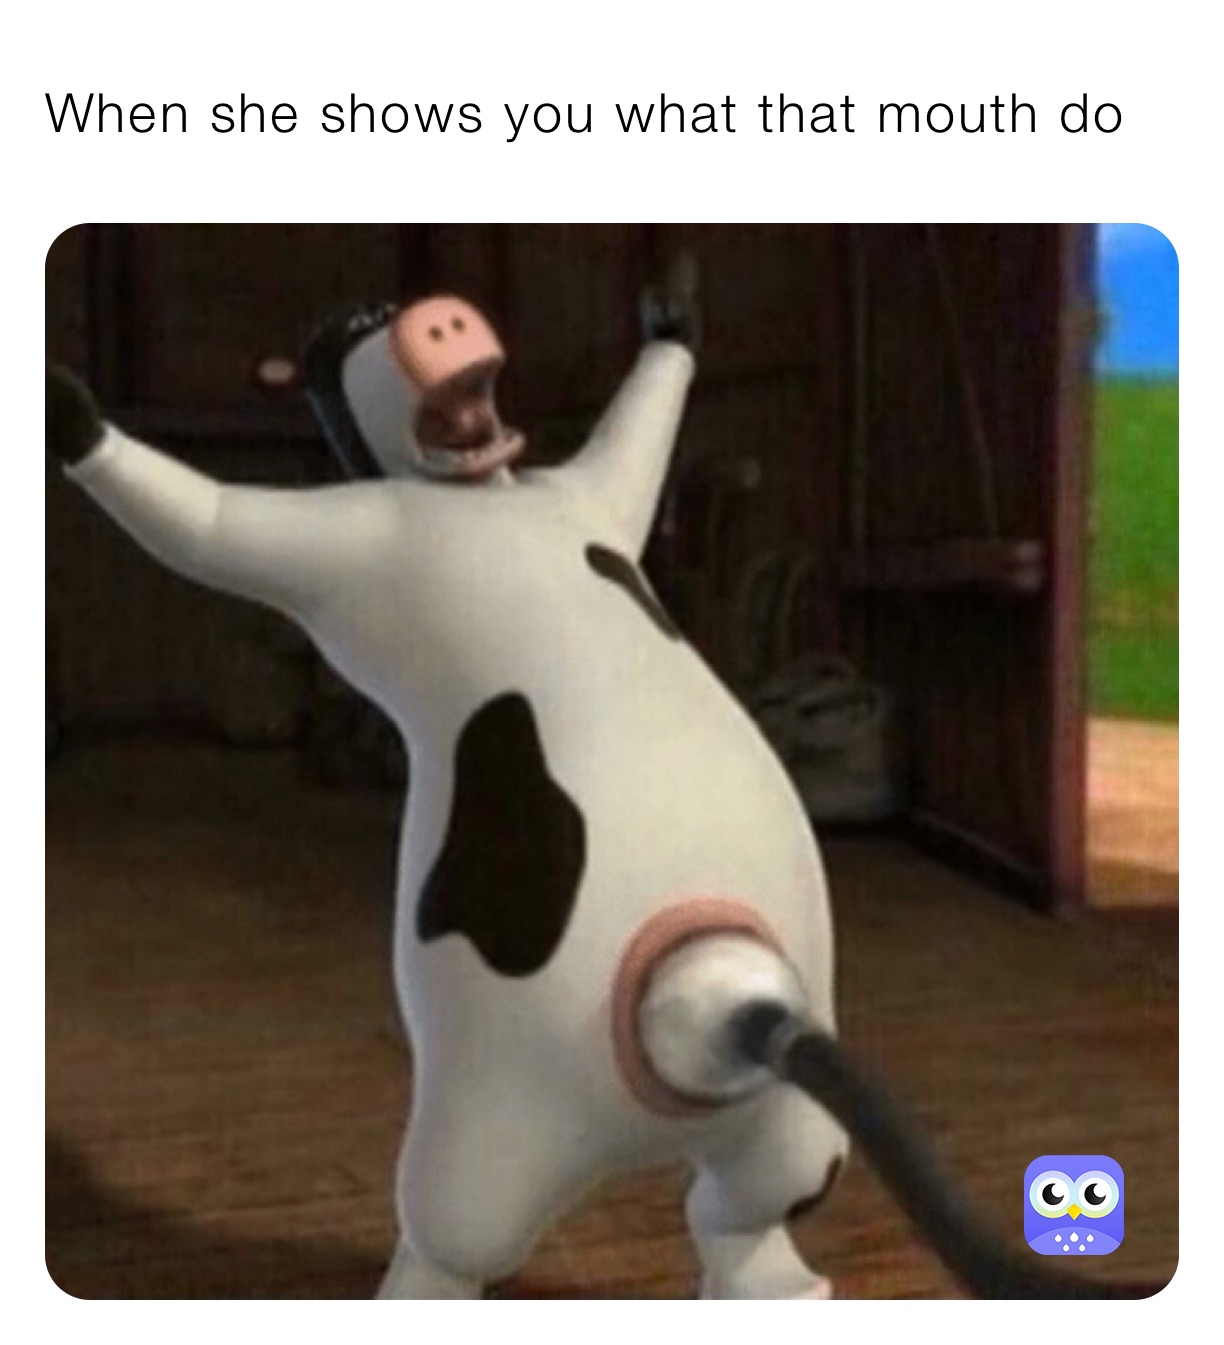 What That Mouth Do